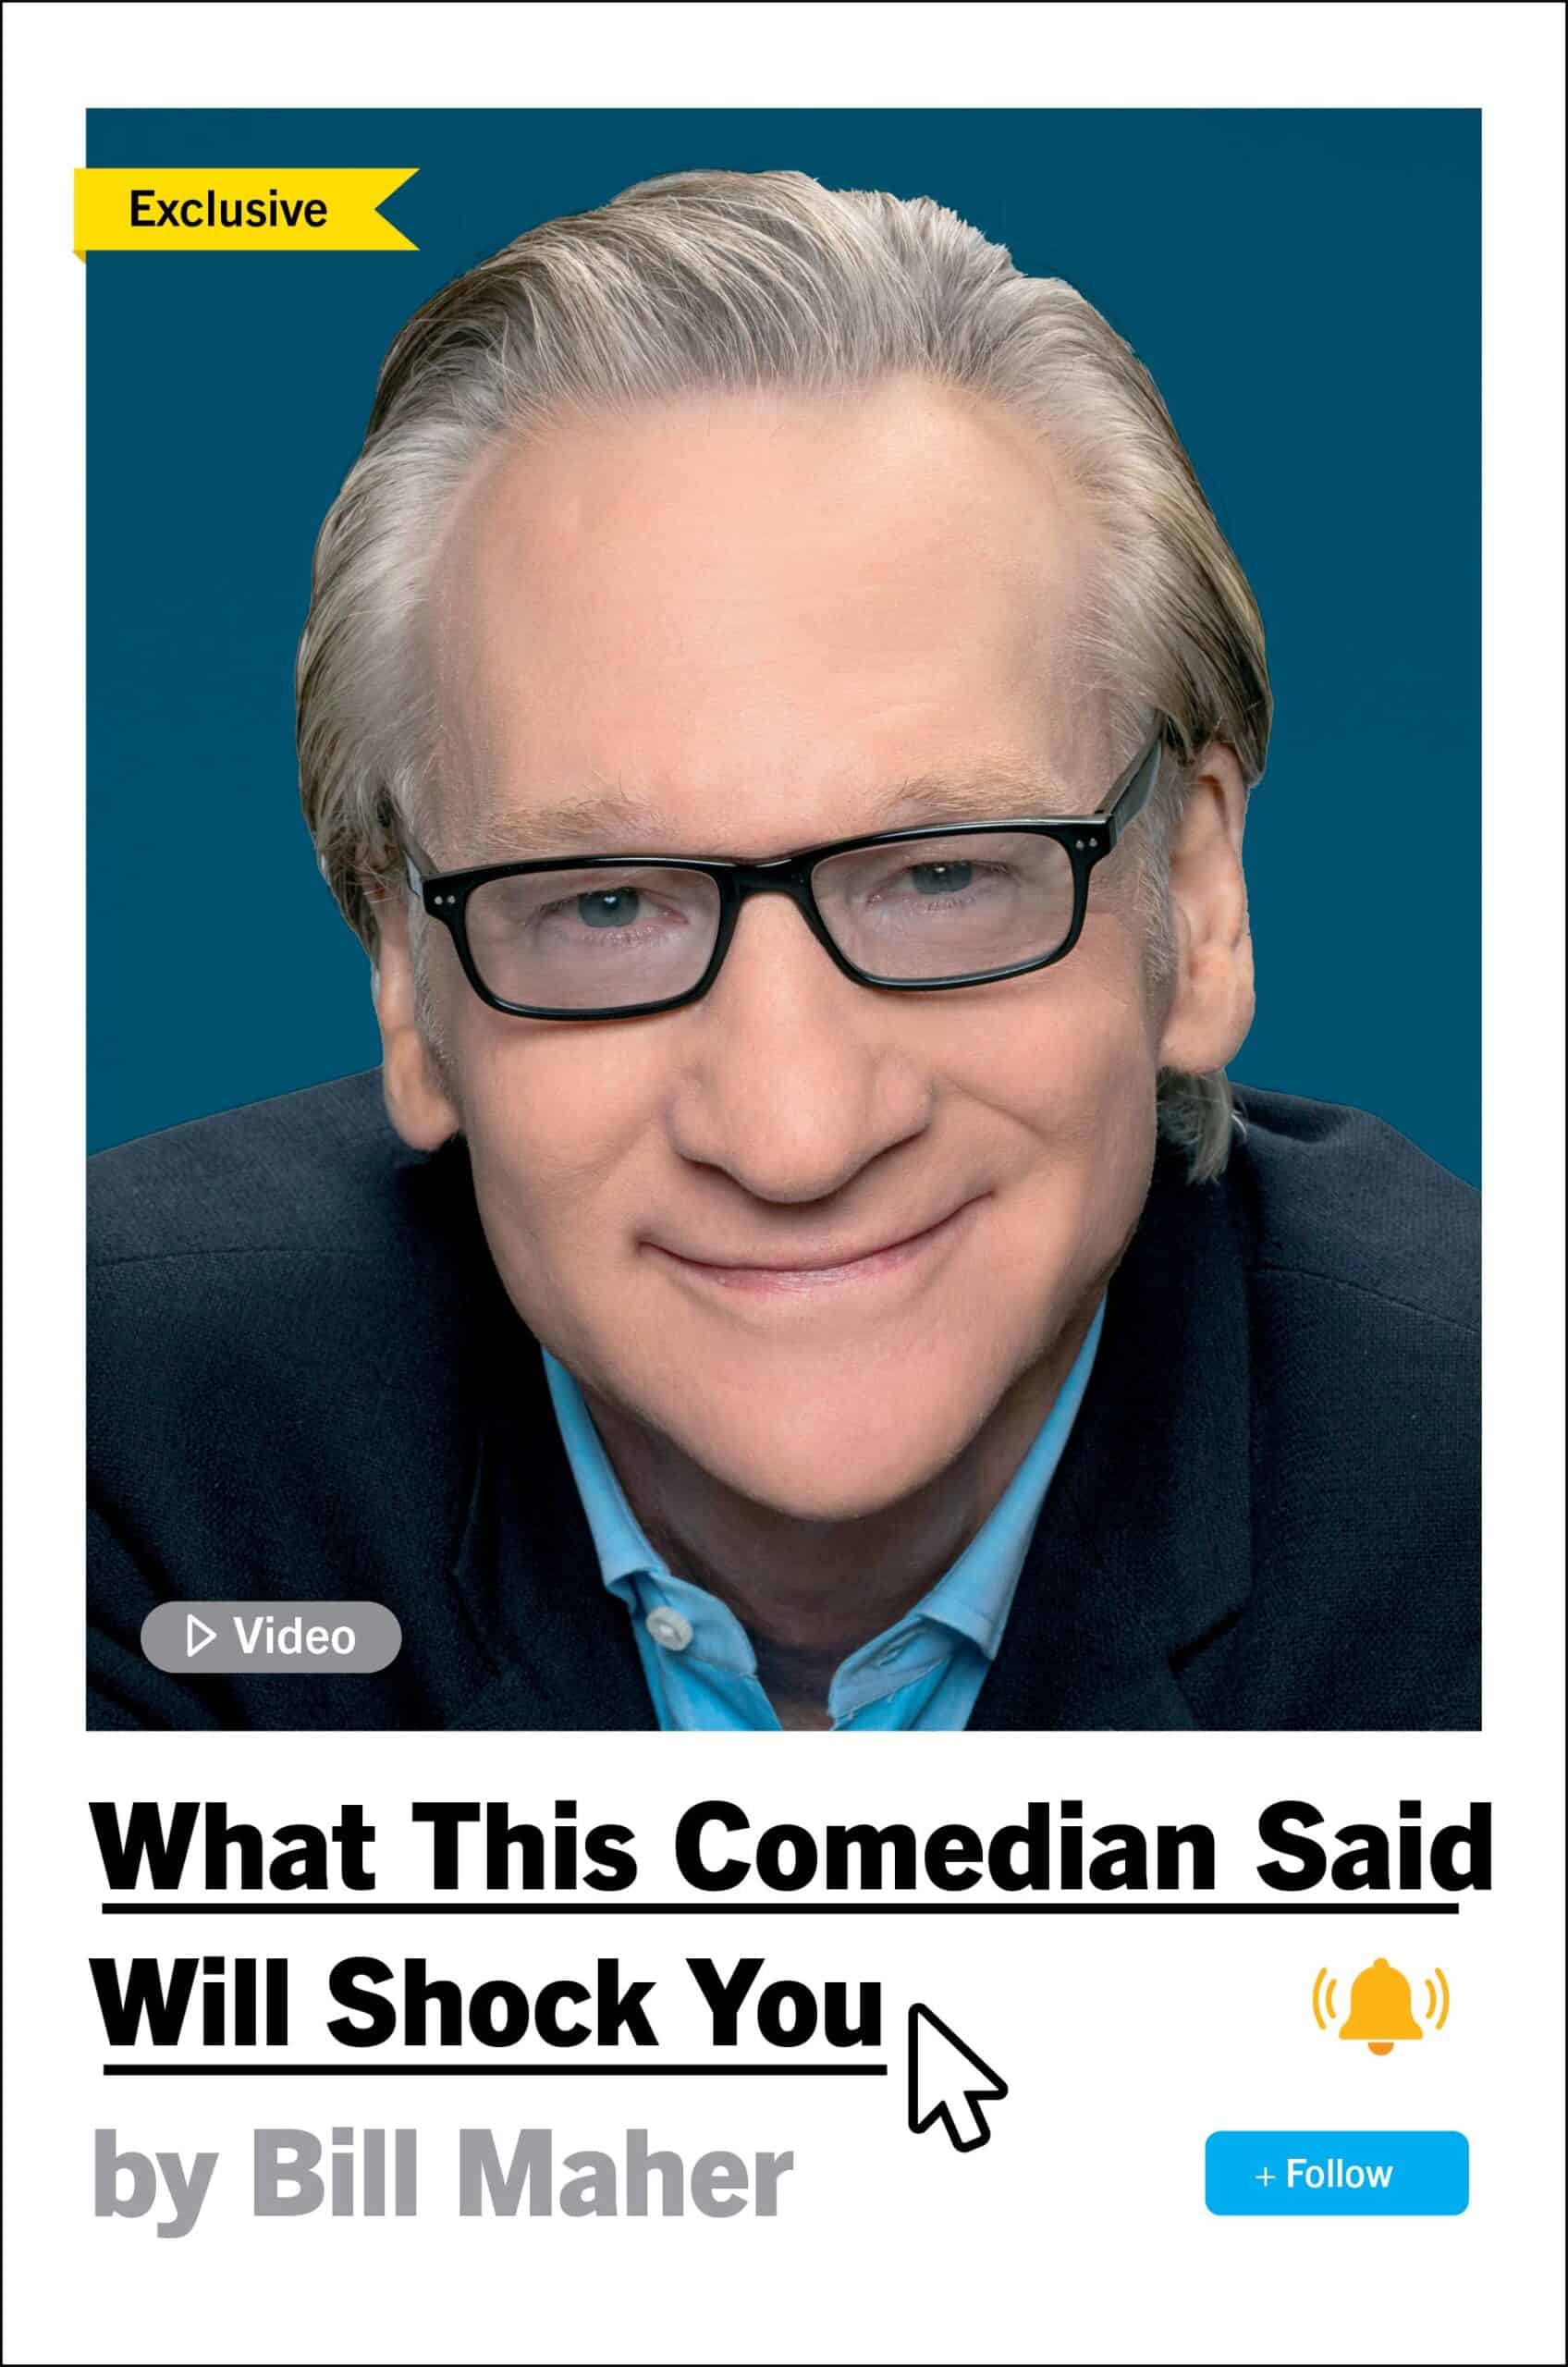 What This Comedian Said cover